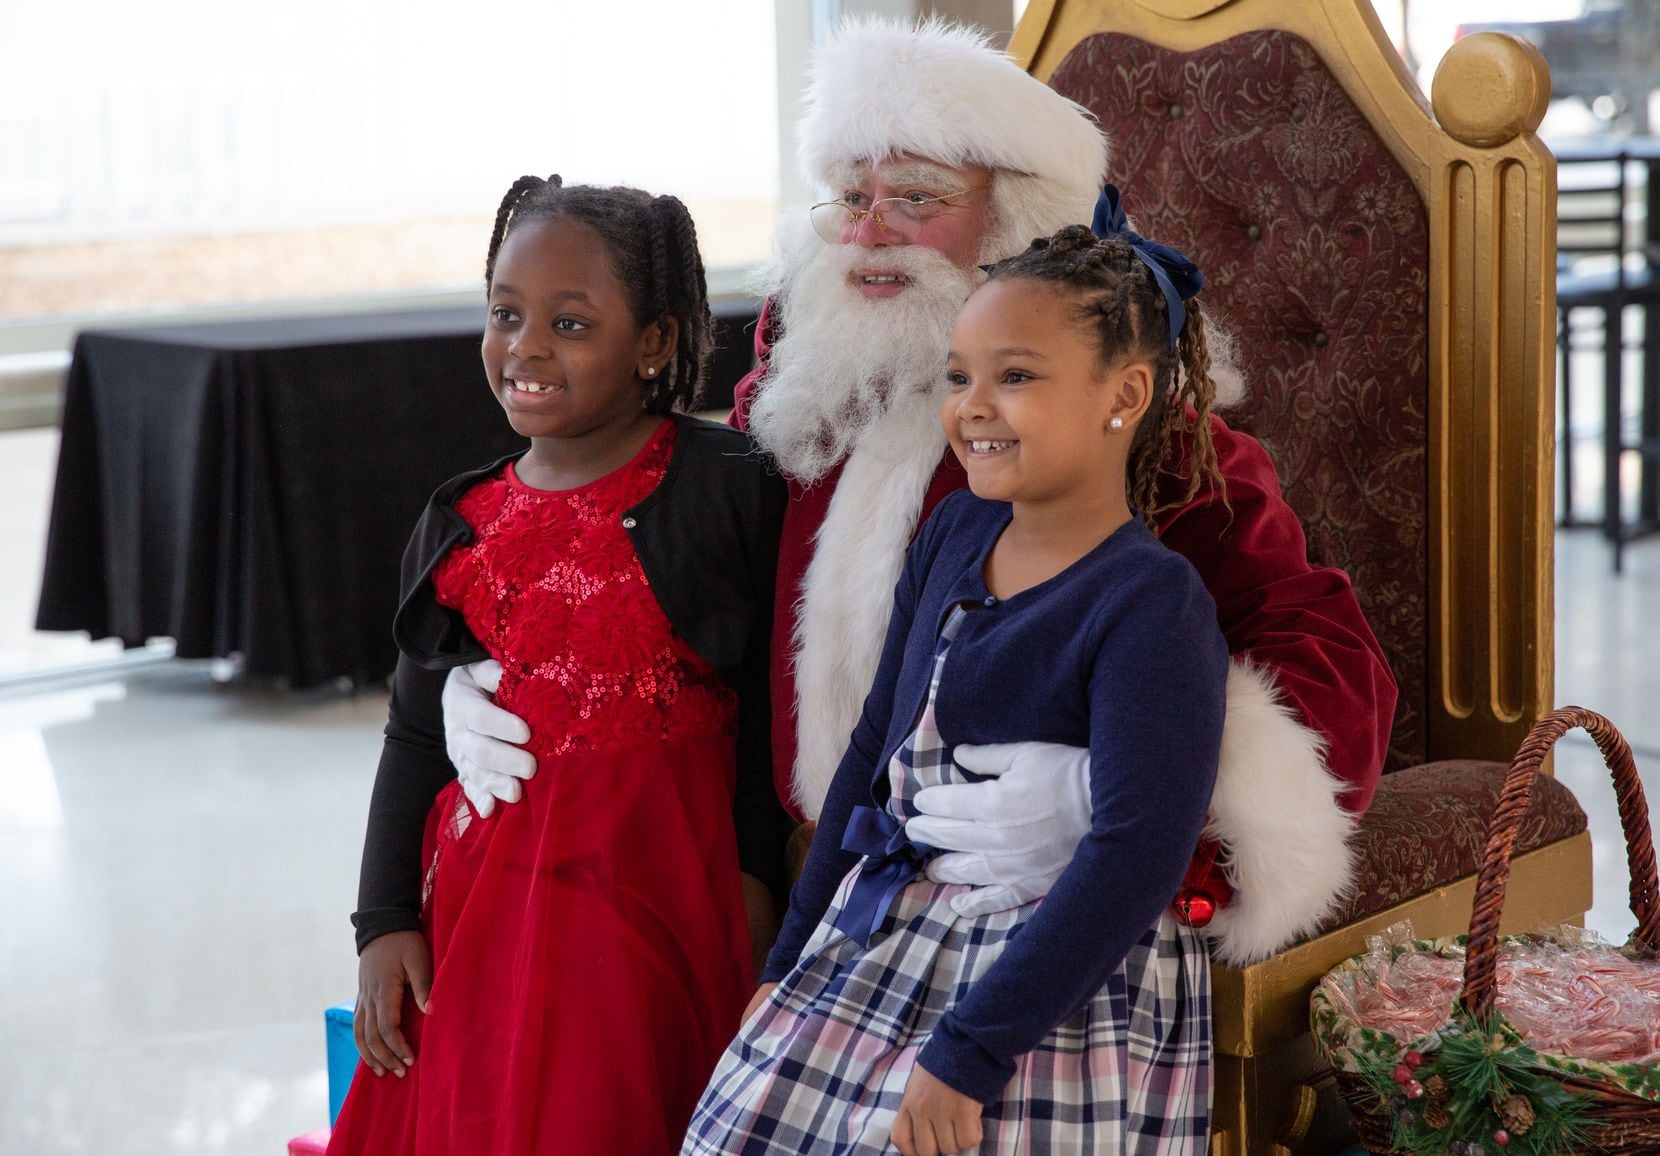 Guests of the Dallas Symphony's annual Christmas Pops tradition pose with Santa Claus.